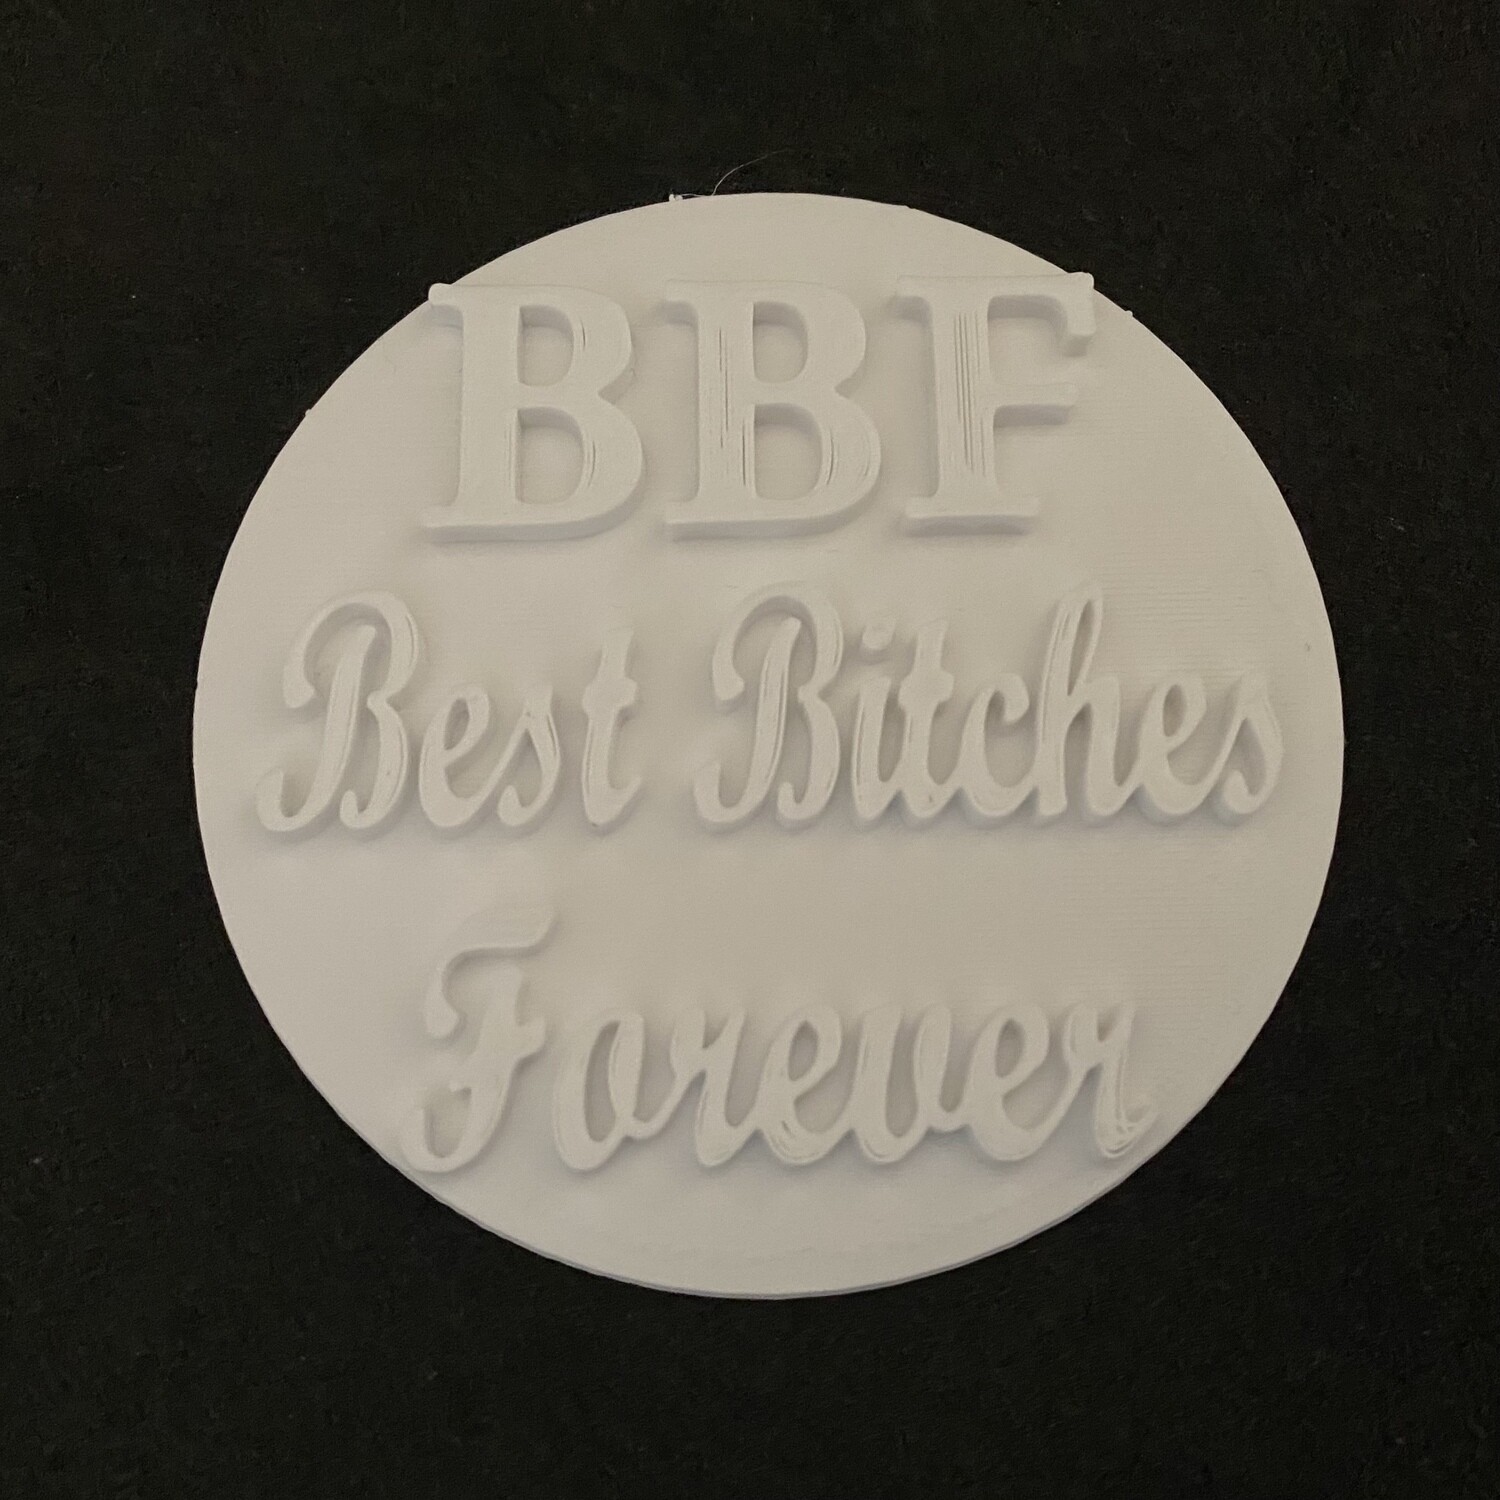 BBF - Best Bitches Forever